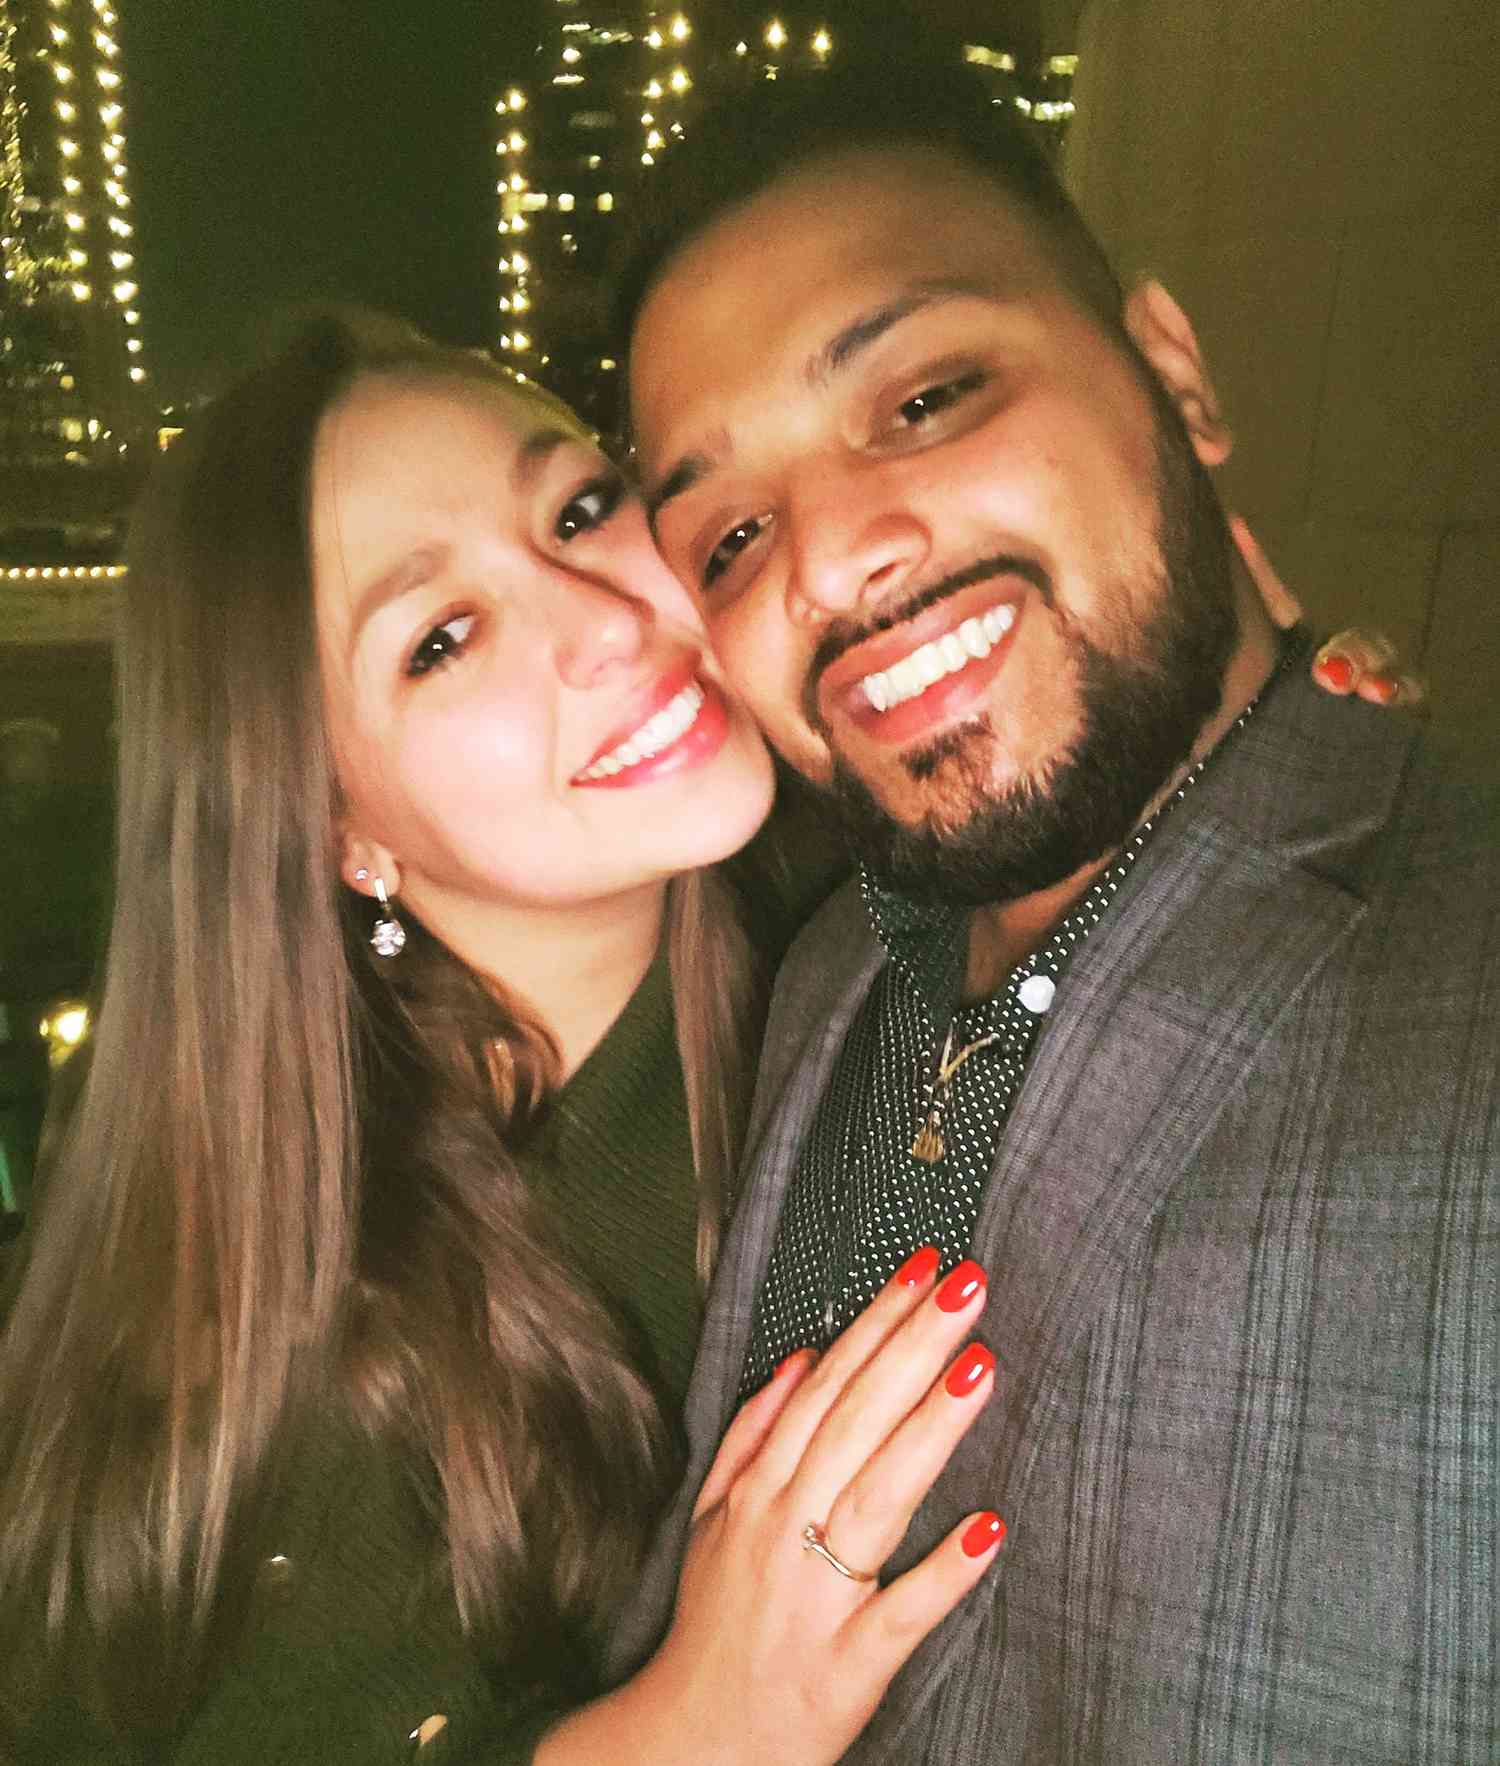 Astroworld Victim Danish Baig, 27, Died 'Trying to Save' His Fiancée: 'He Had Just Started His Life'